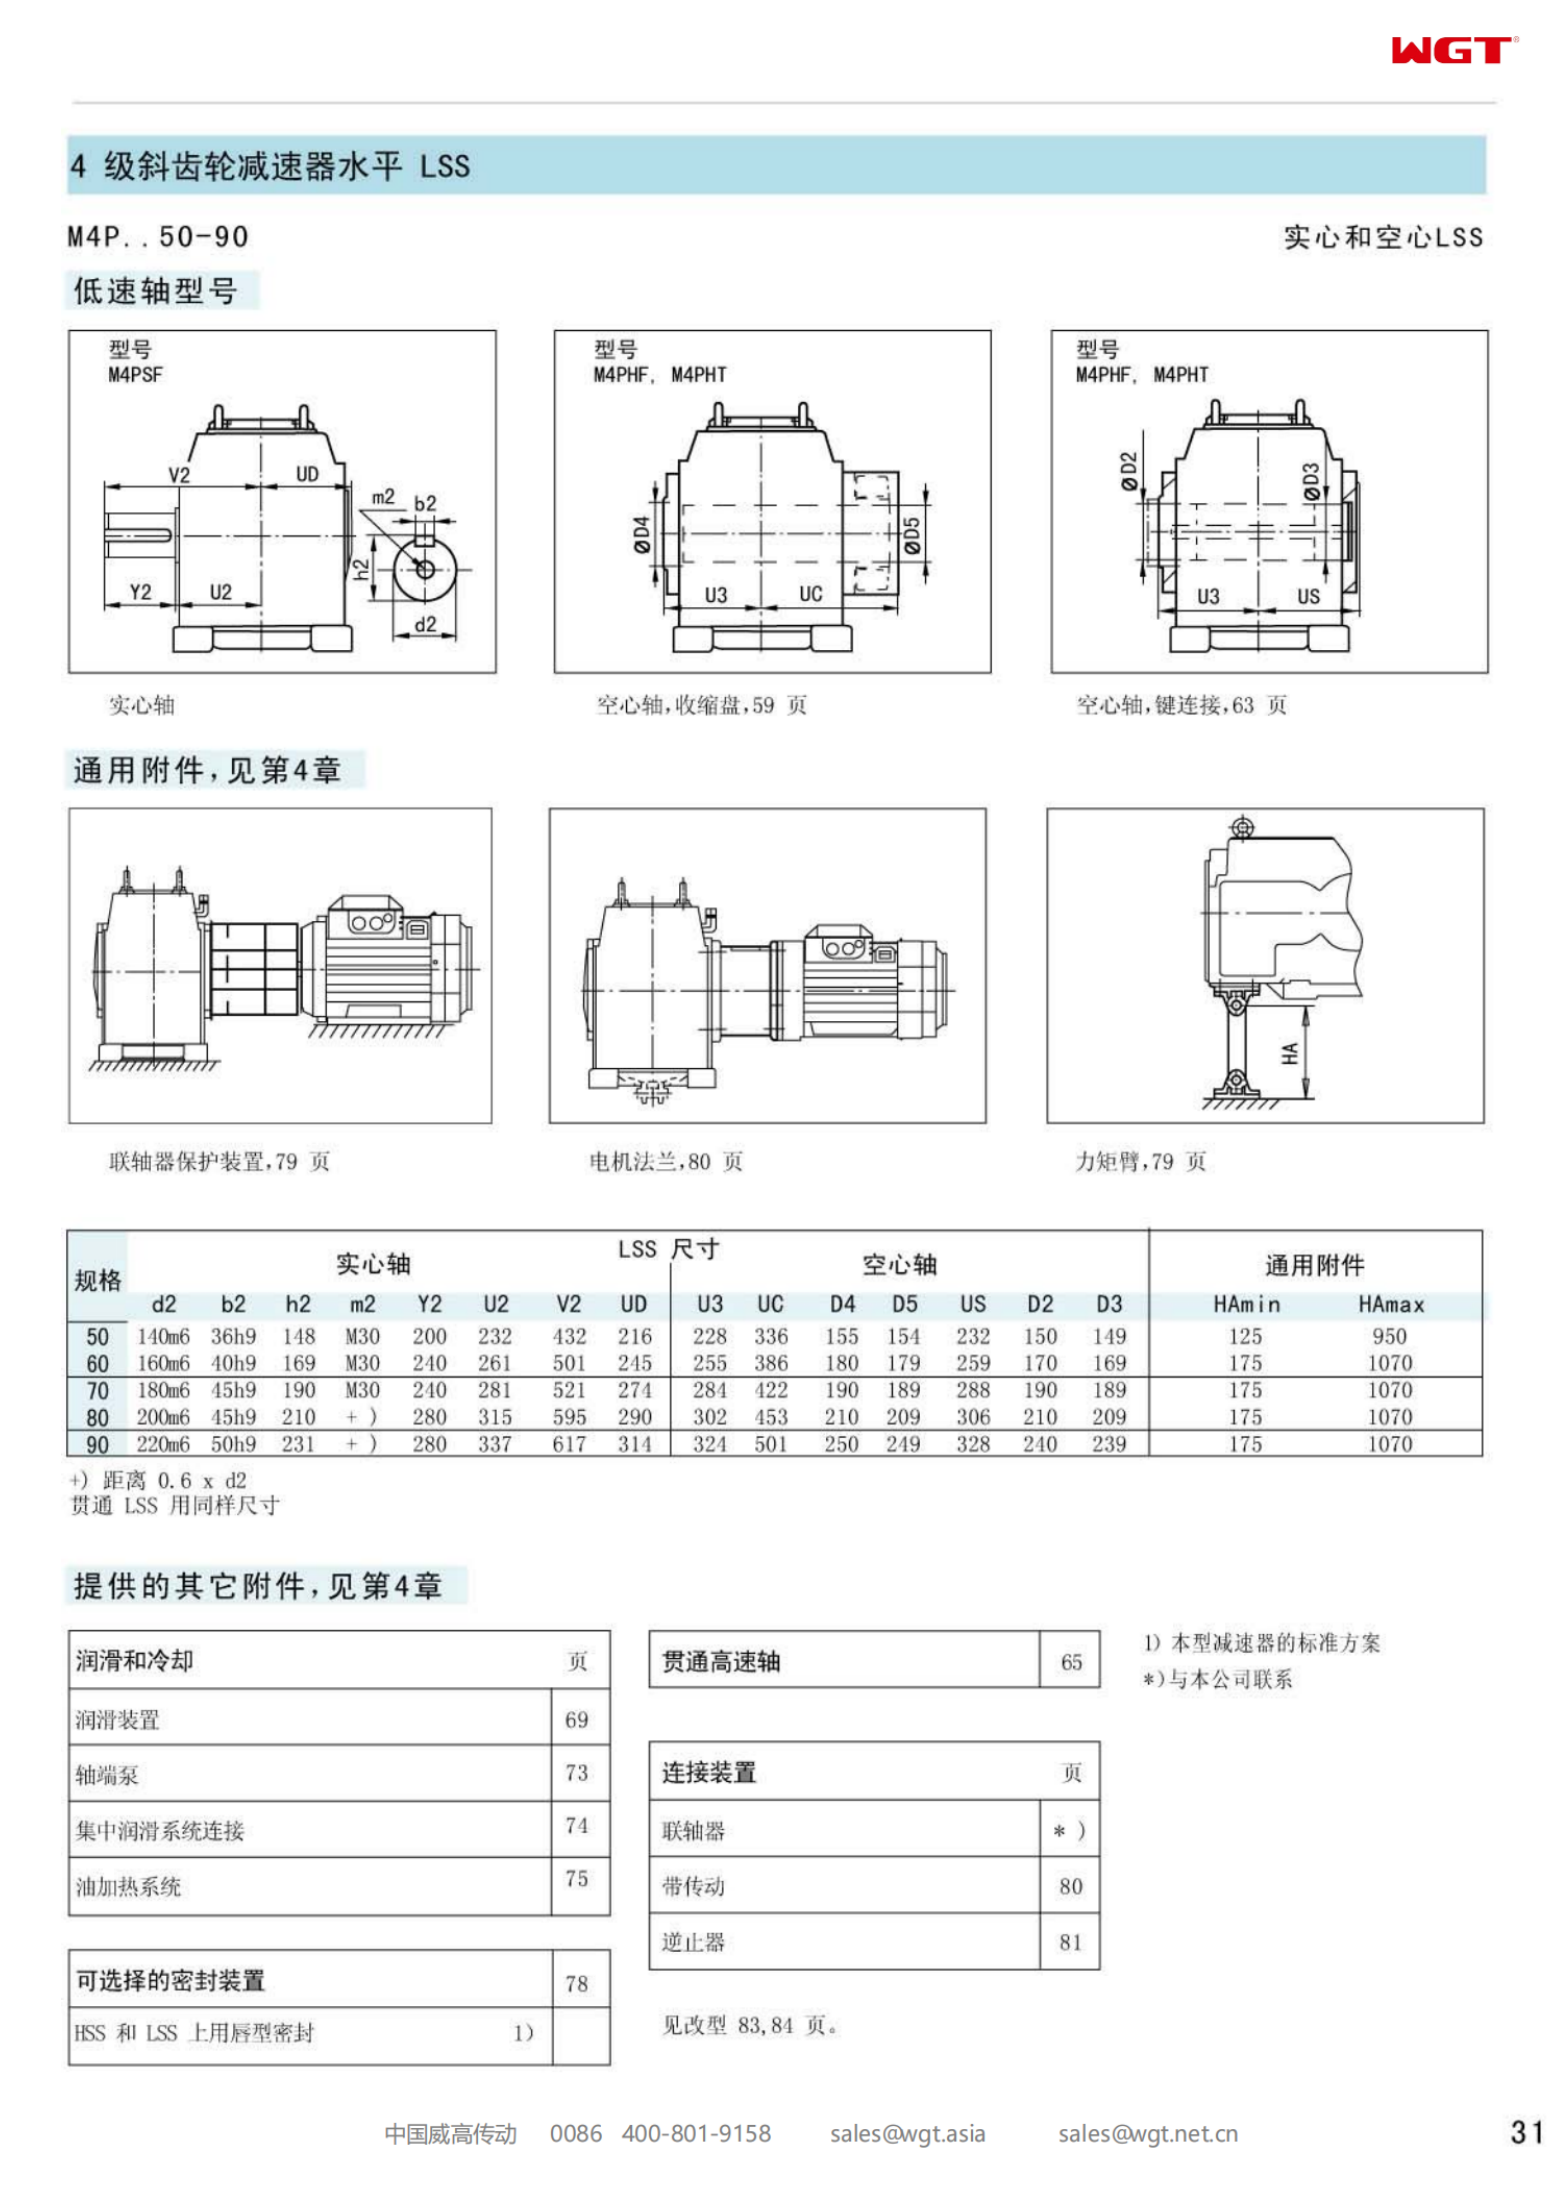 M4PHF80 Replace_SEW_M_Series Gearbox